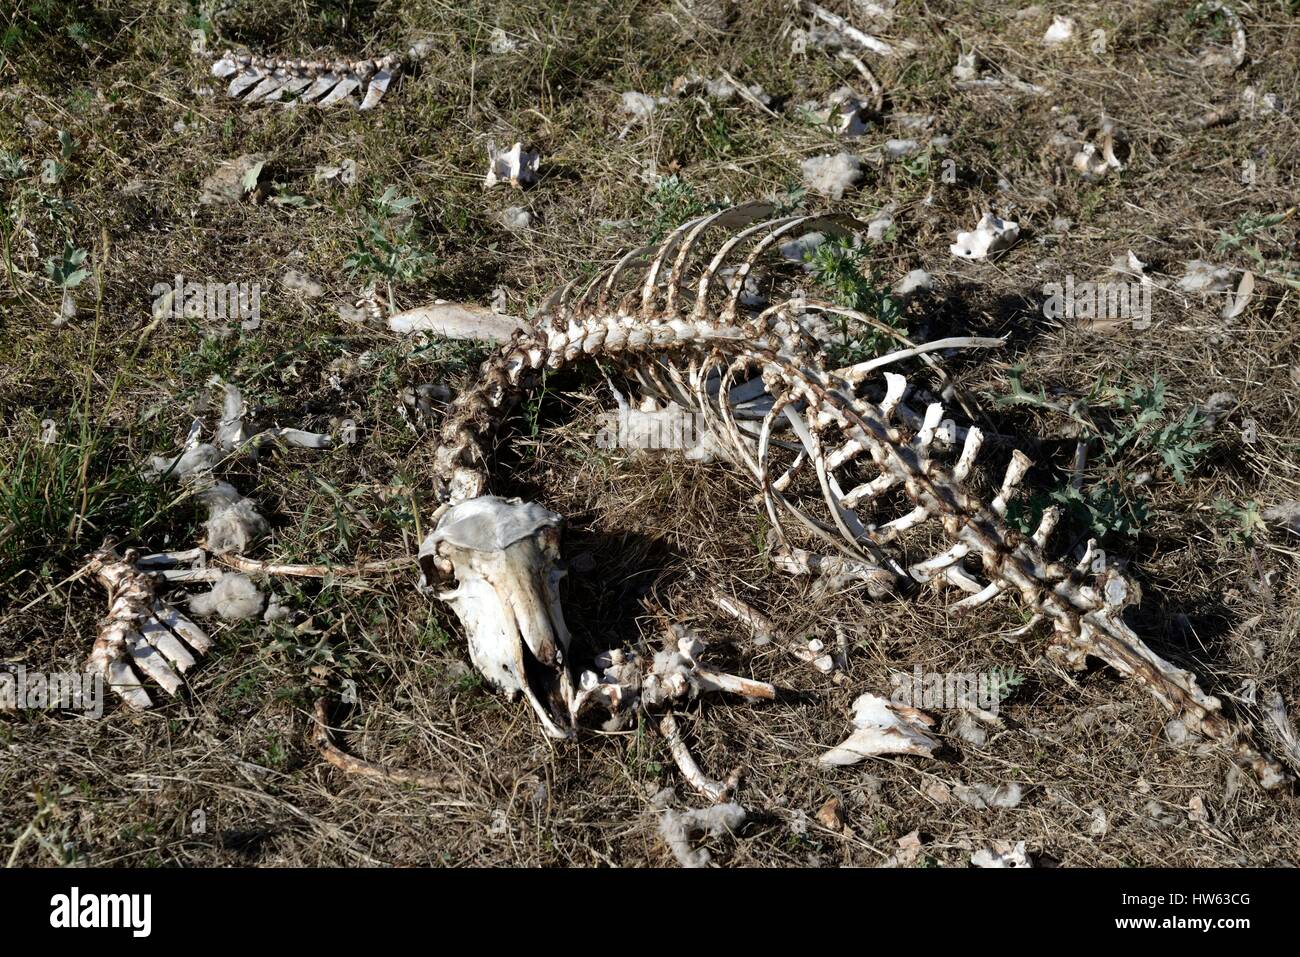 France, Lozere, Cevennes, Causse Mejean, sheep skeleton cleaned by vultures on a mass grave Stock Photo